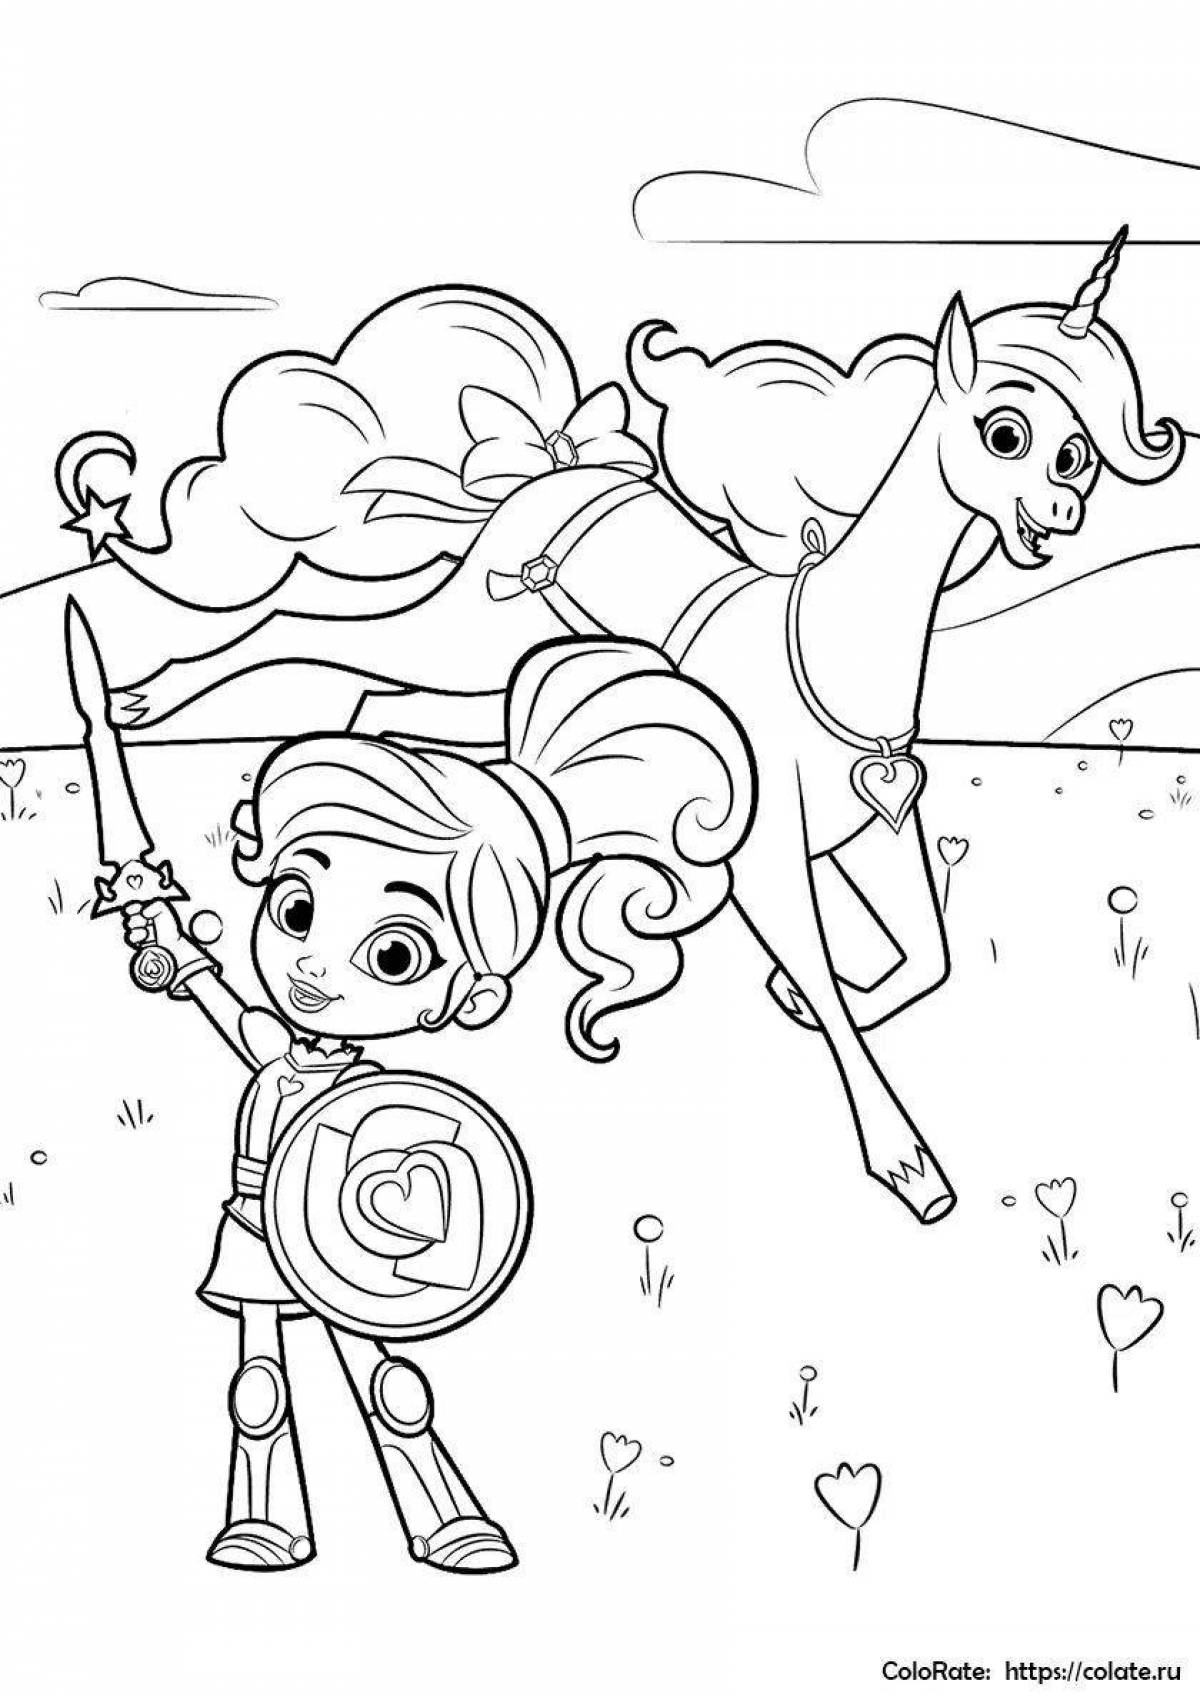 Amazing princess and knight coloring book